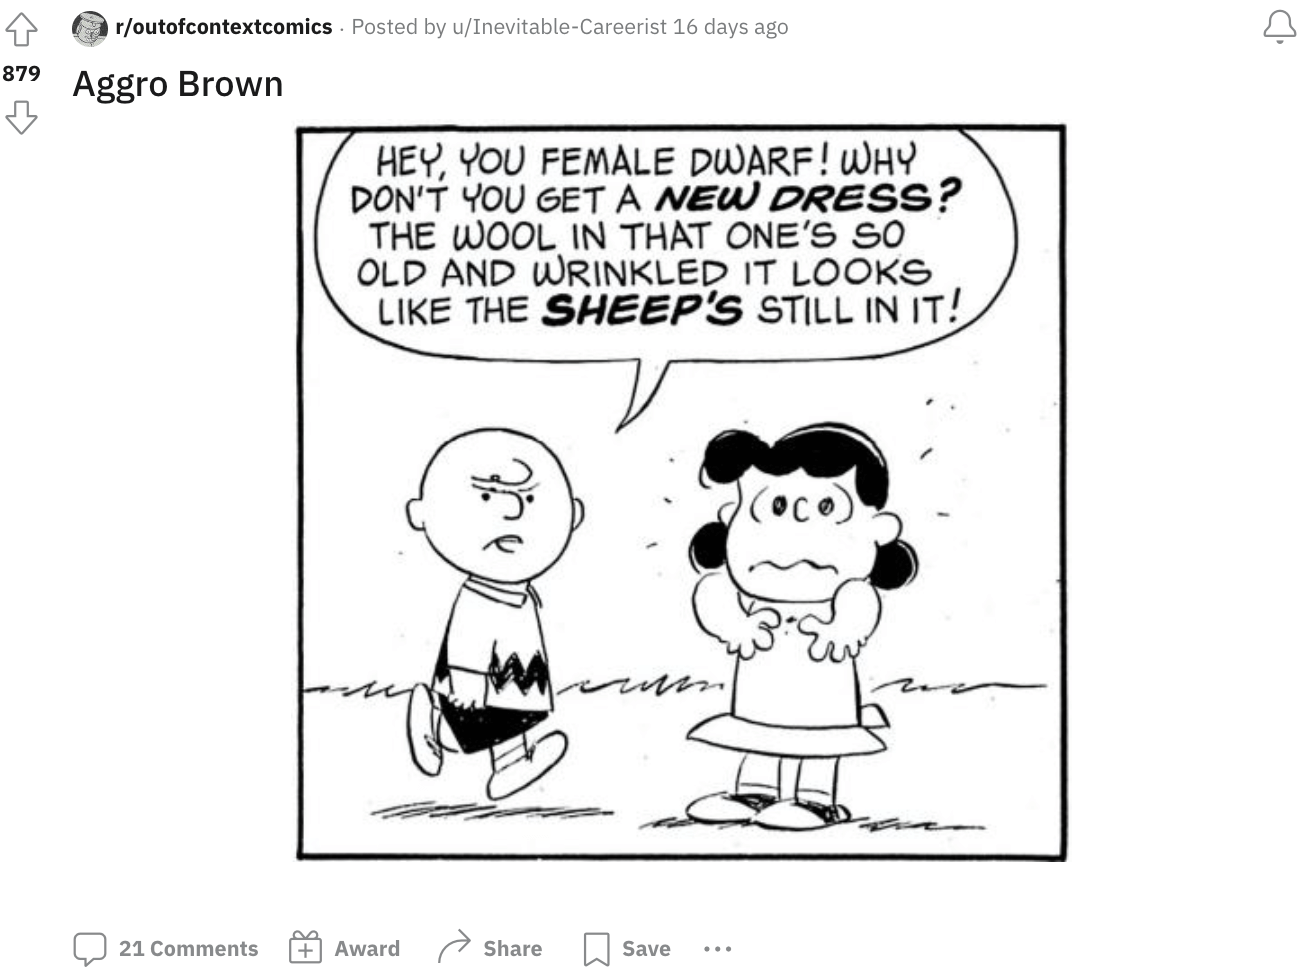 Charlie Brown going full aggro